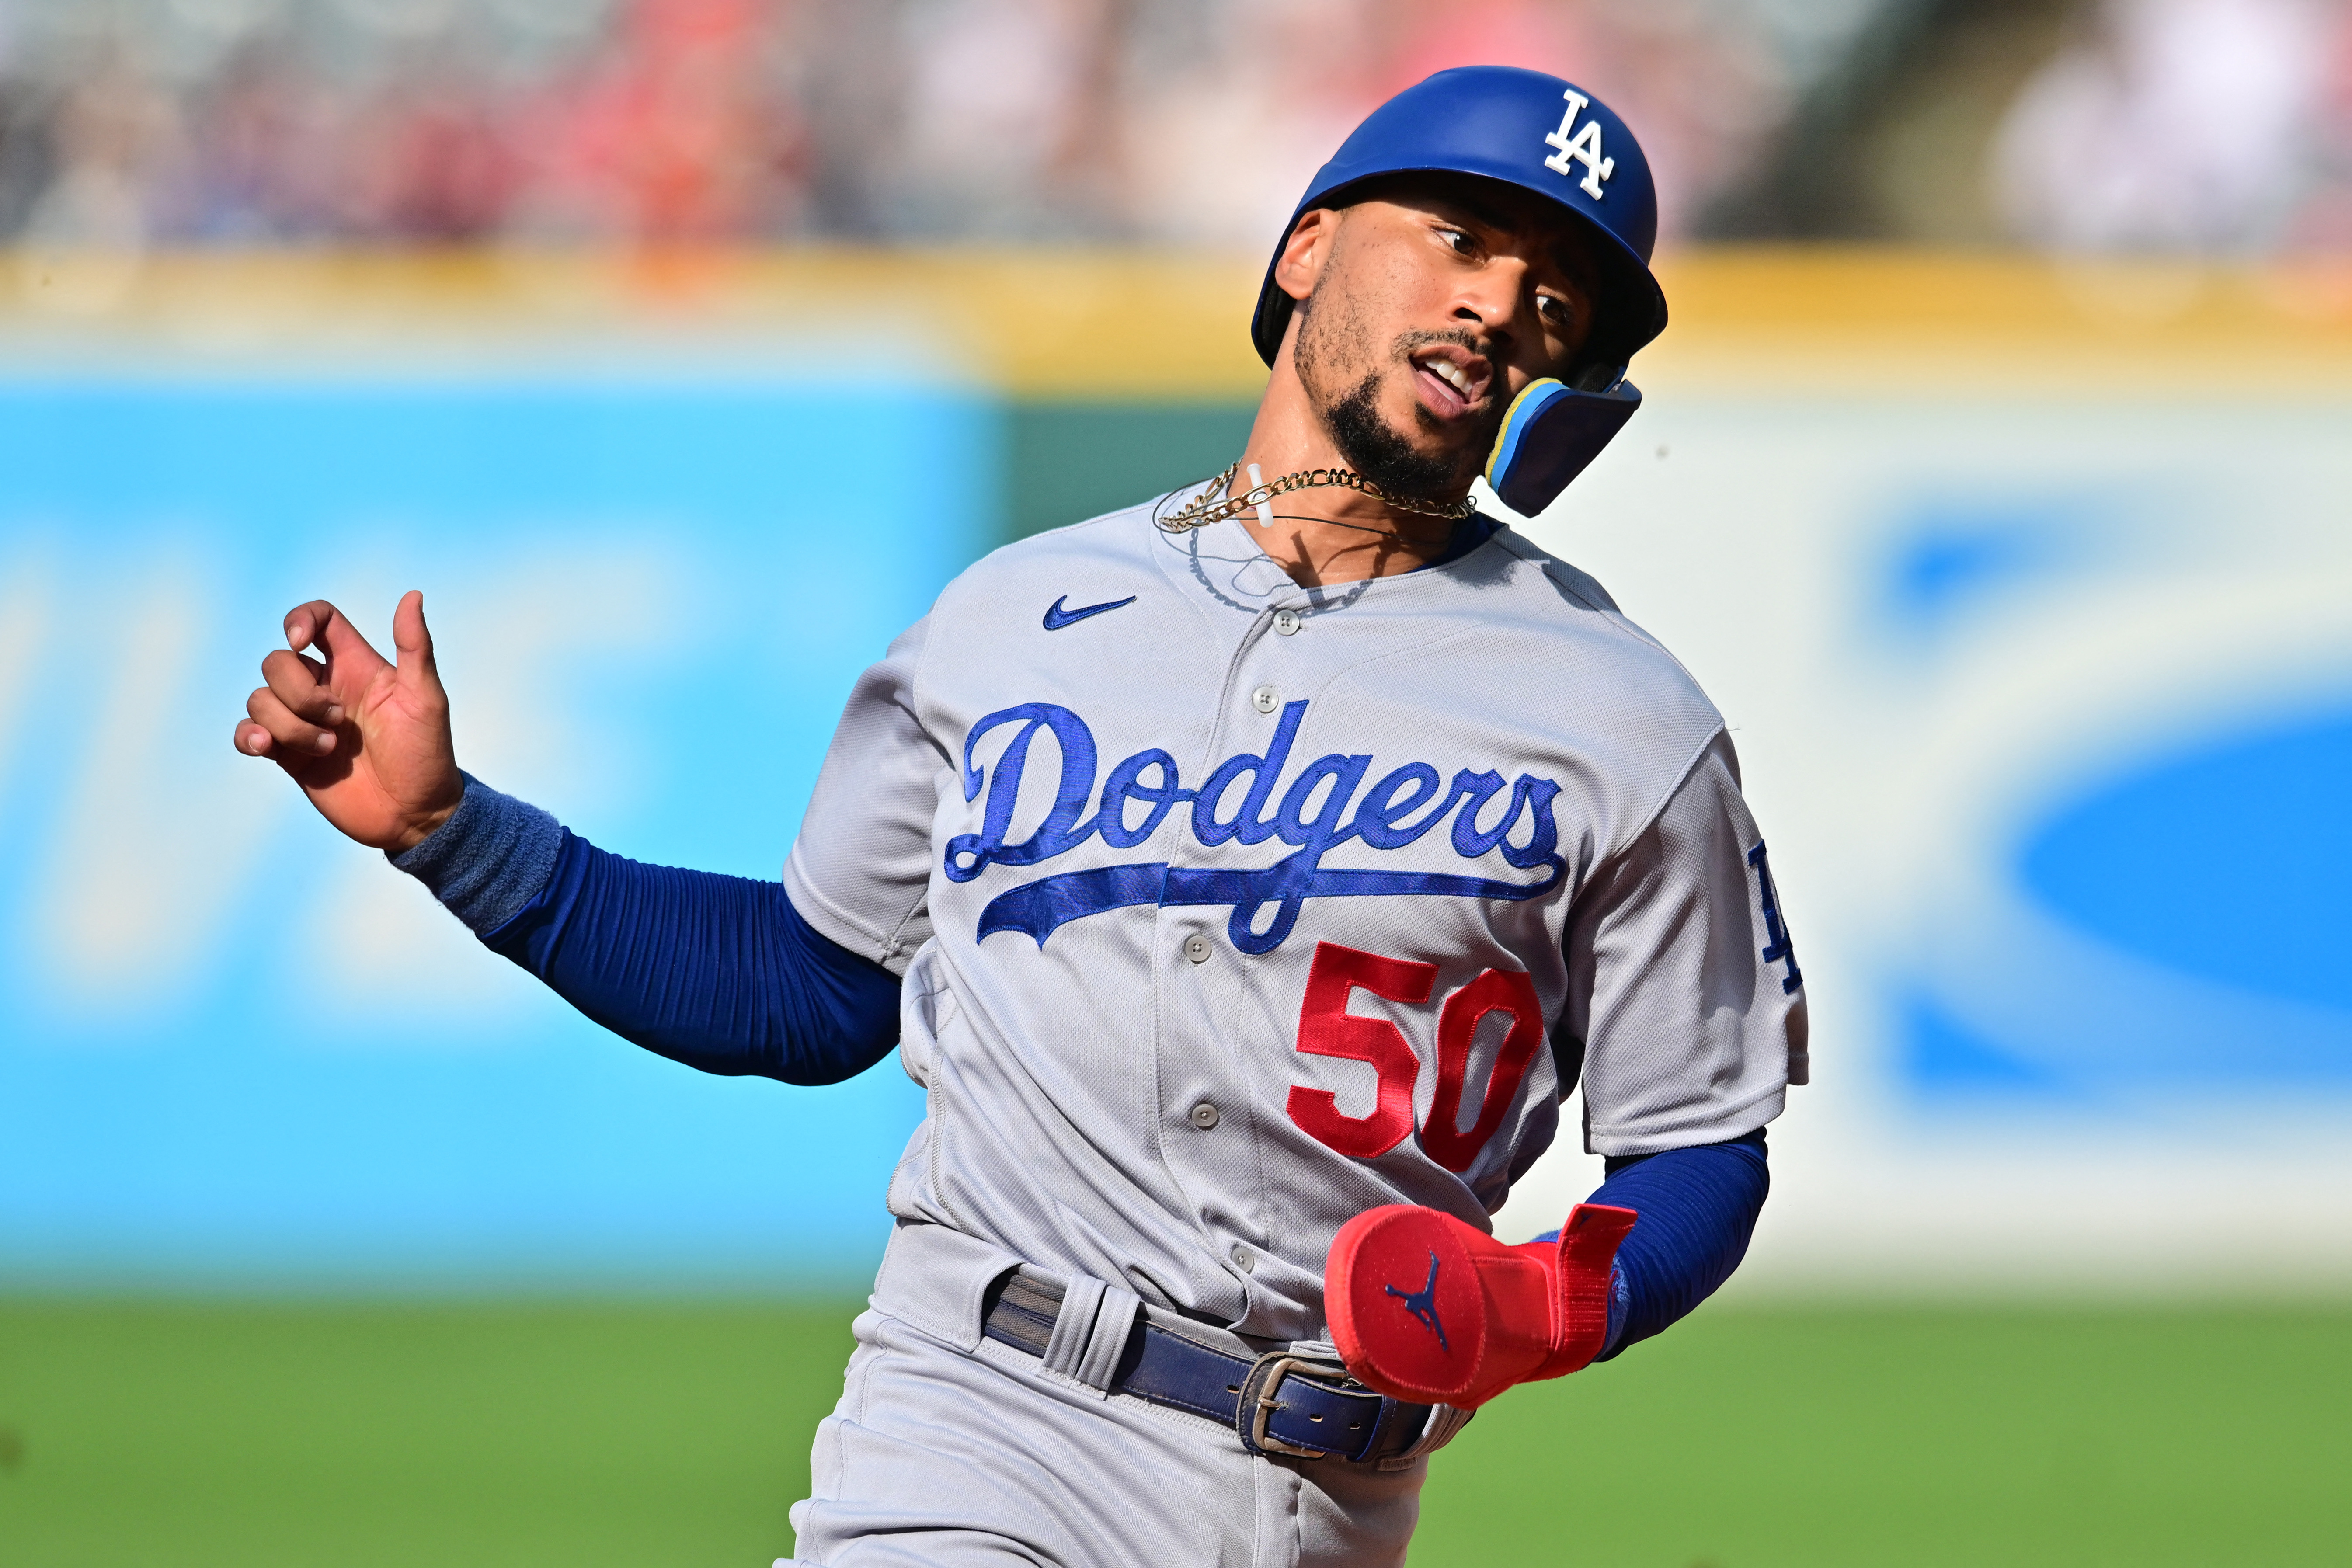 On deck: Astros at Los Angeles Dodgers